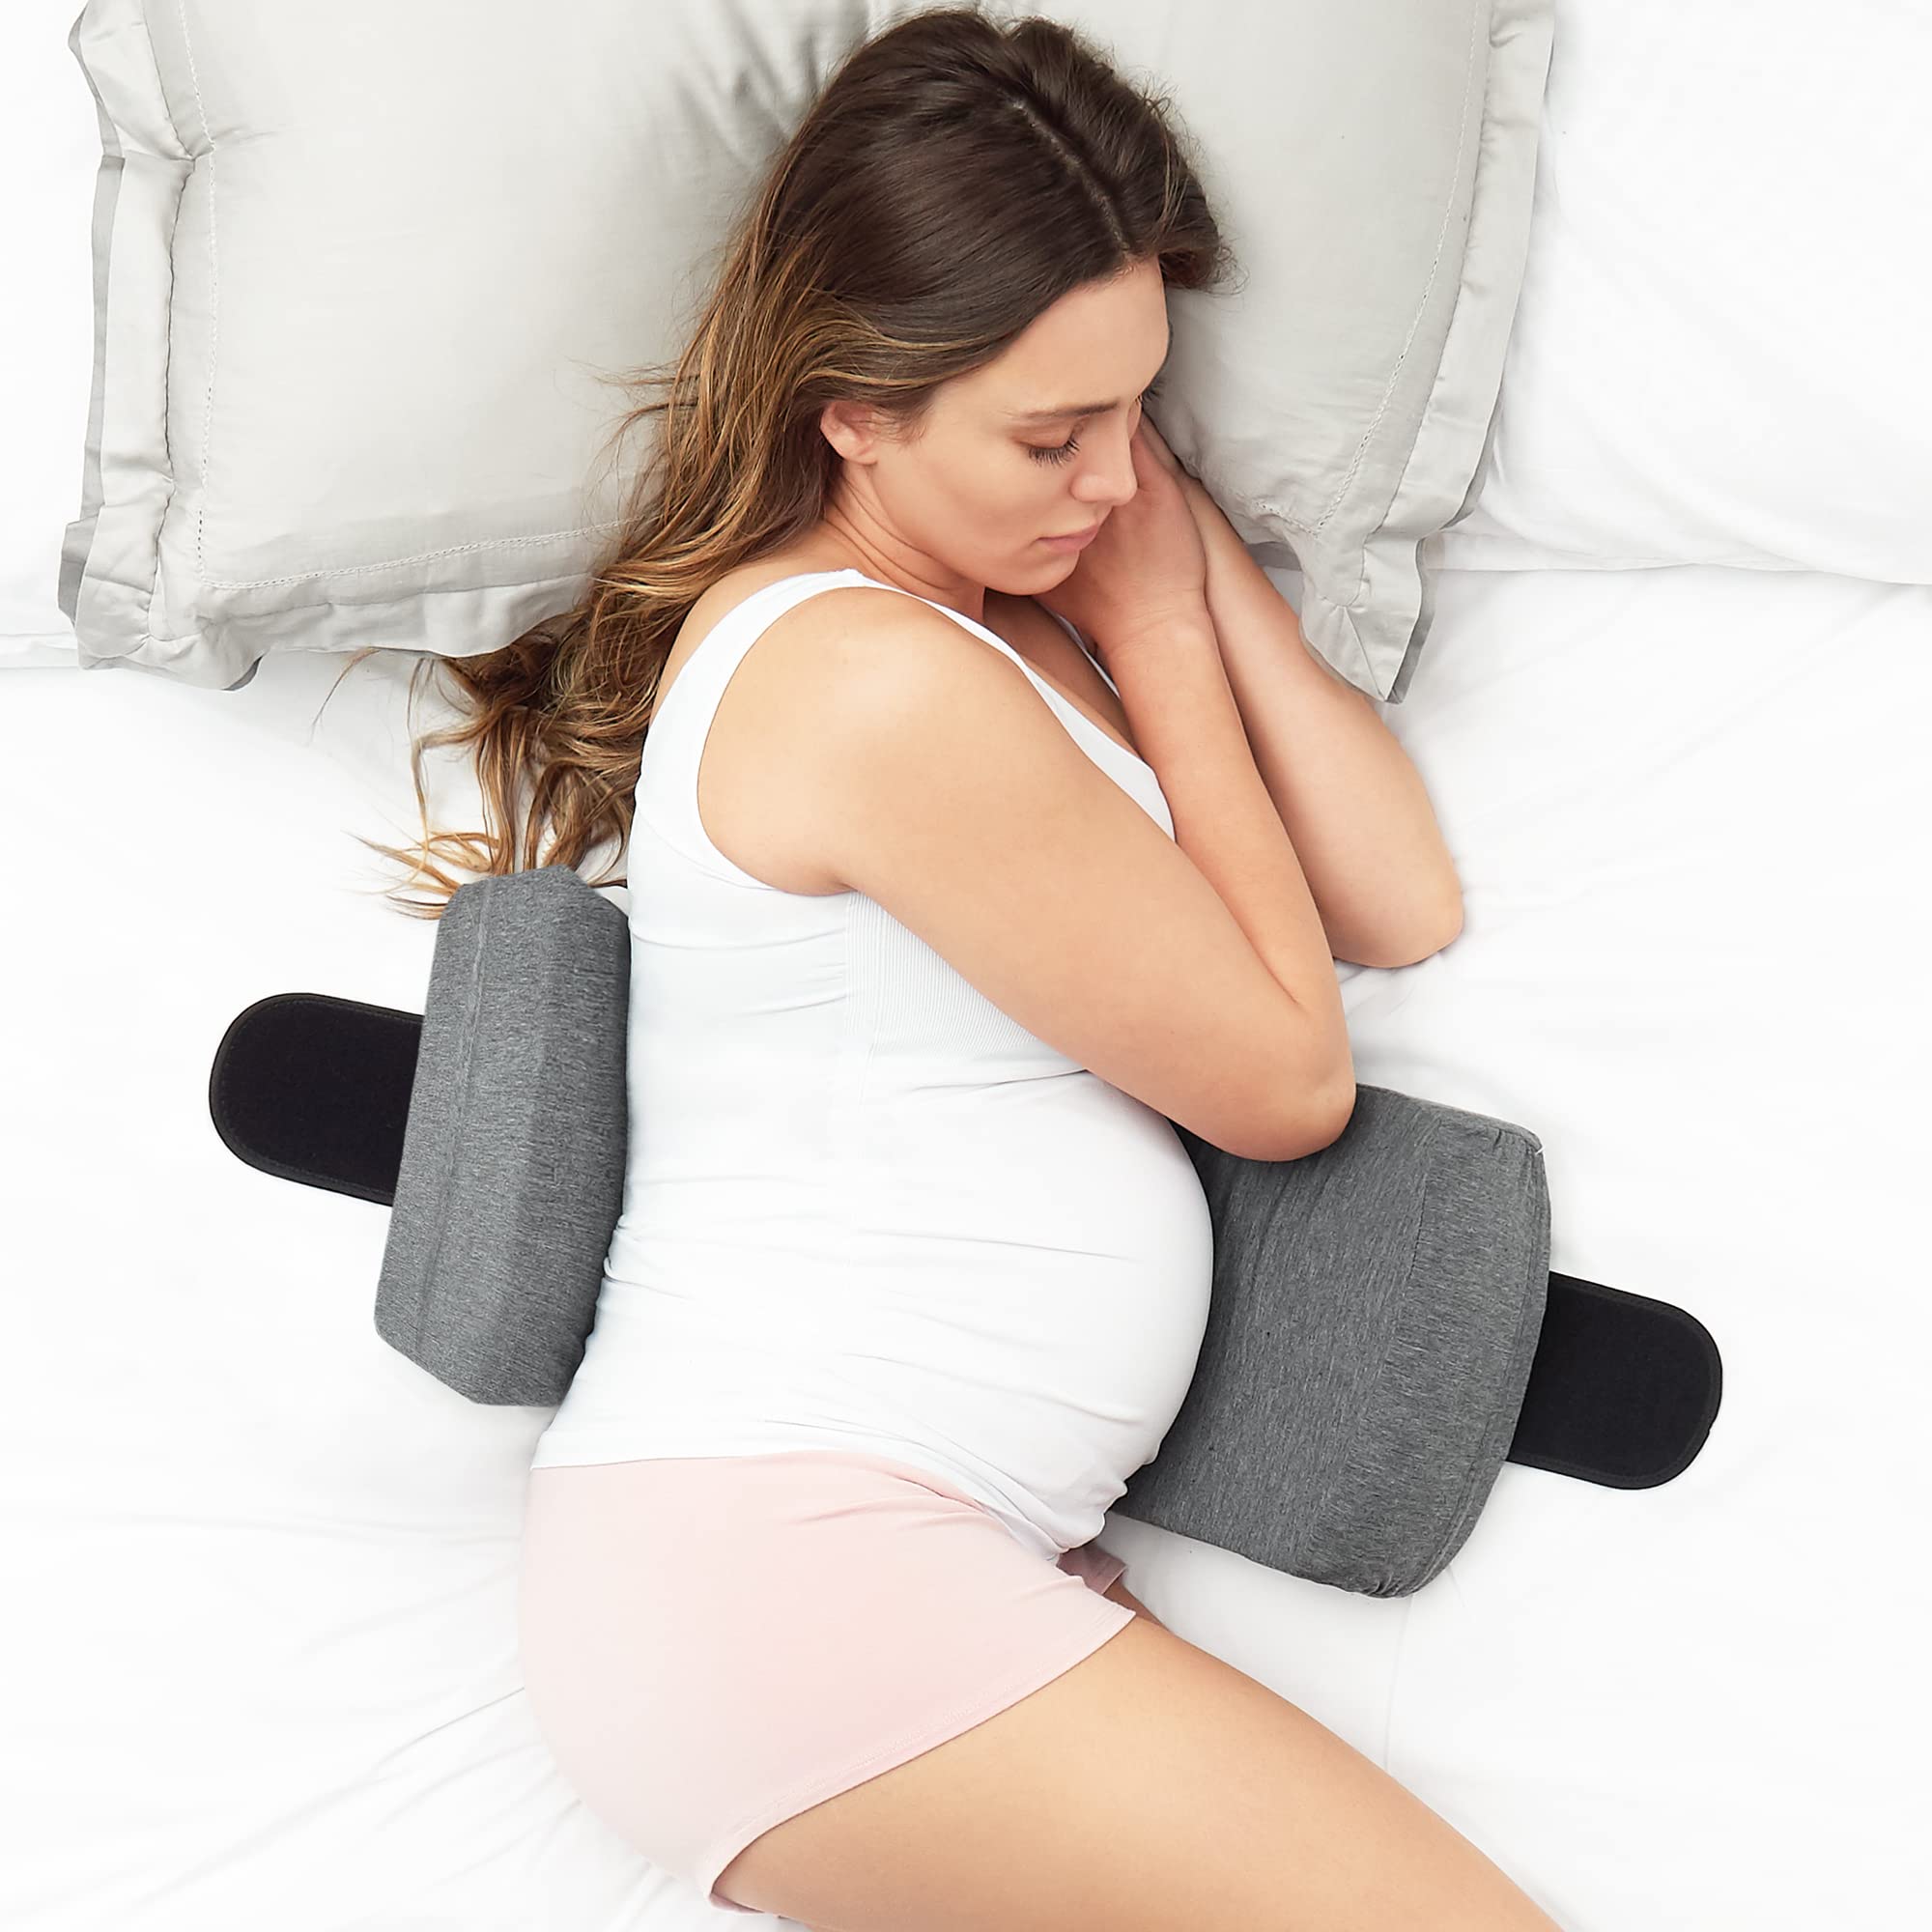 Belly Bandit – S.O.S. Sleep On Side Pregnancy Pillow – Maternity Wedge Pillow, Back Pillow and Belt – Adjustable Back and Pregnant Belly Support for Side Sleeping – Promotes Optimal Positioning, Grey